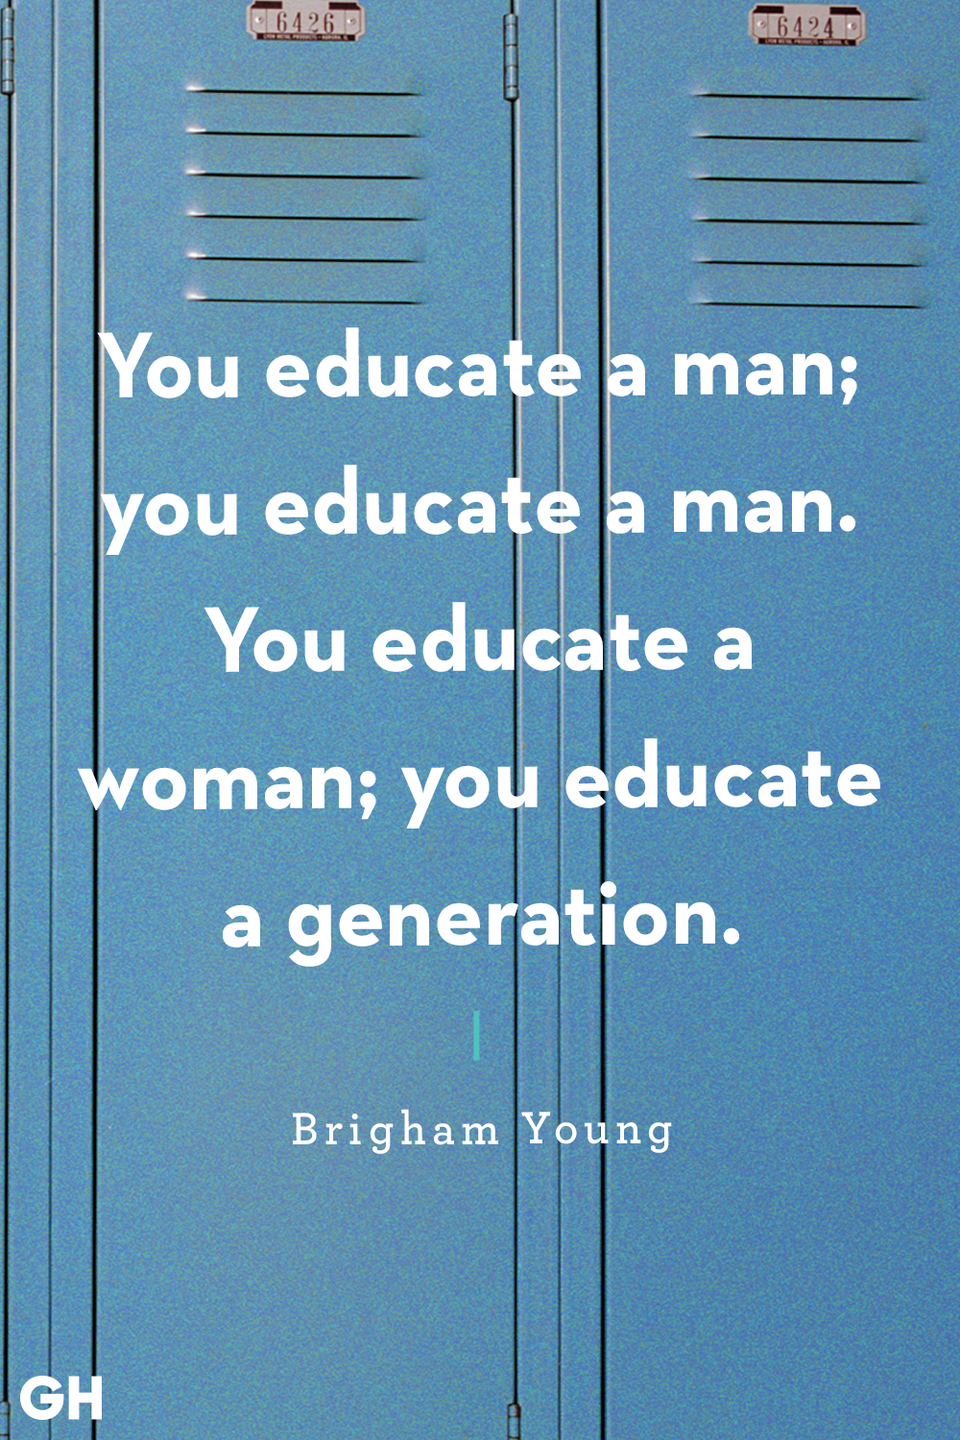 35) Brigham Young